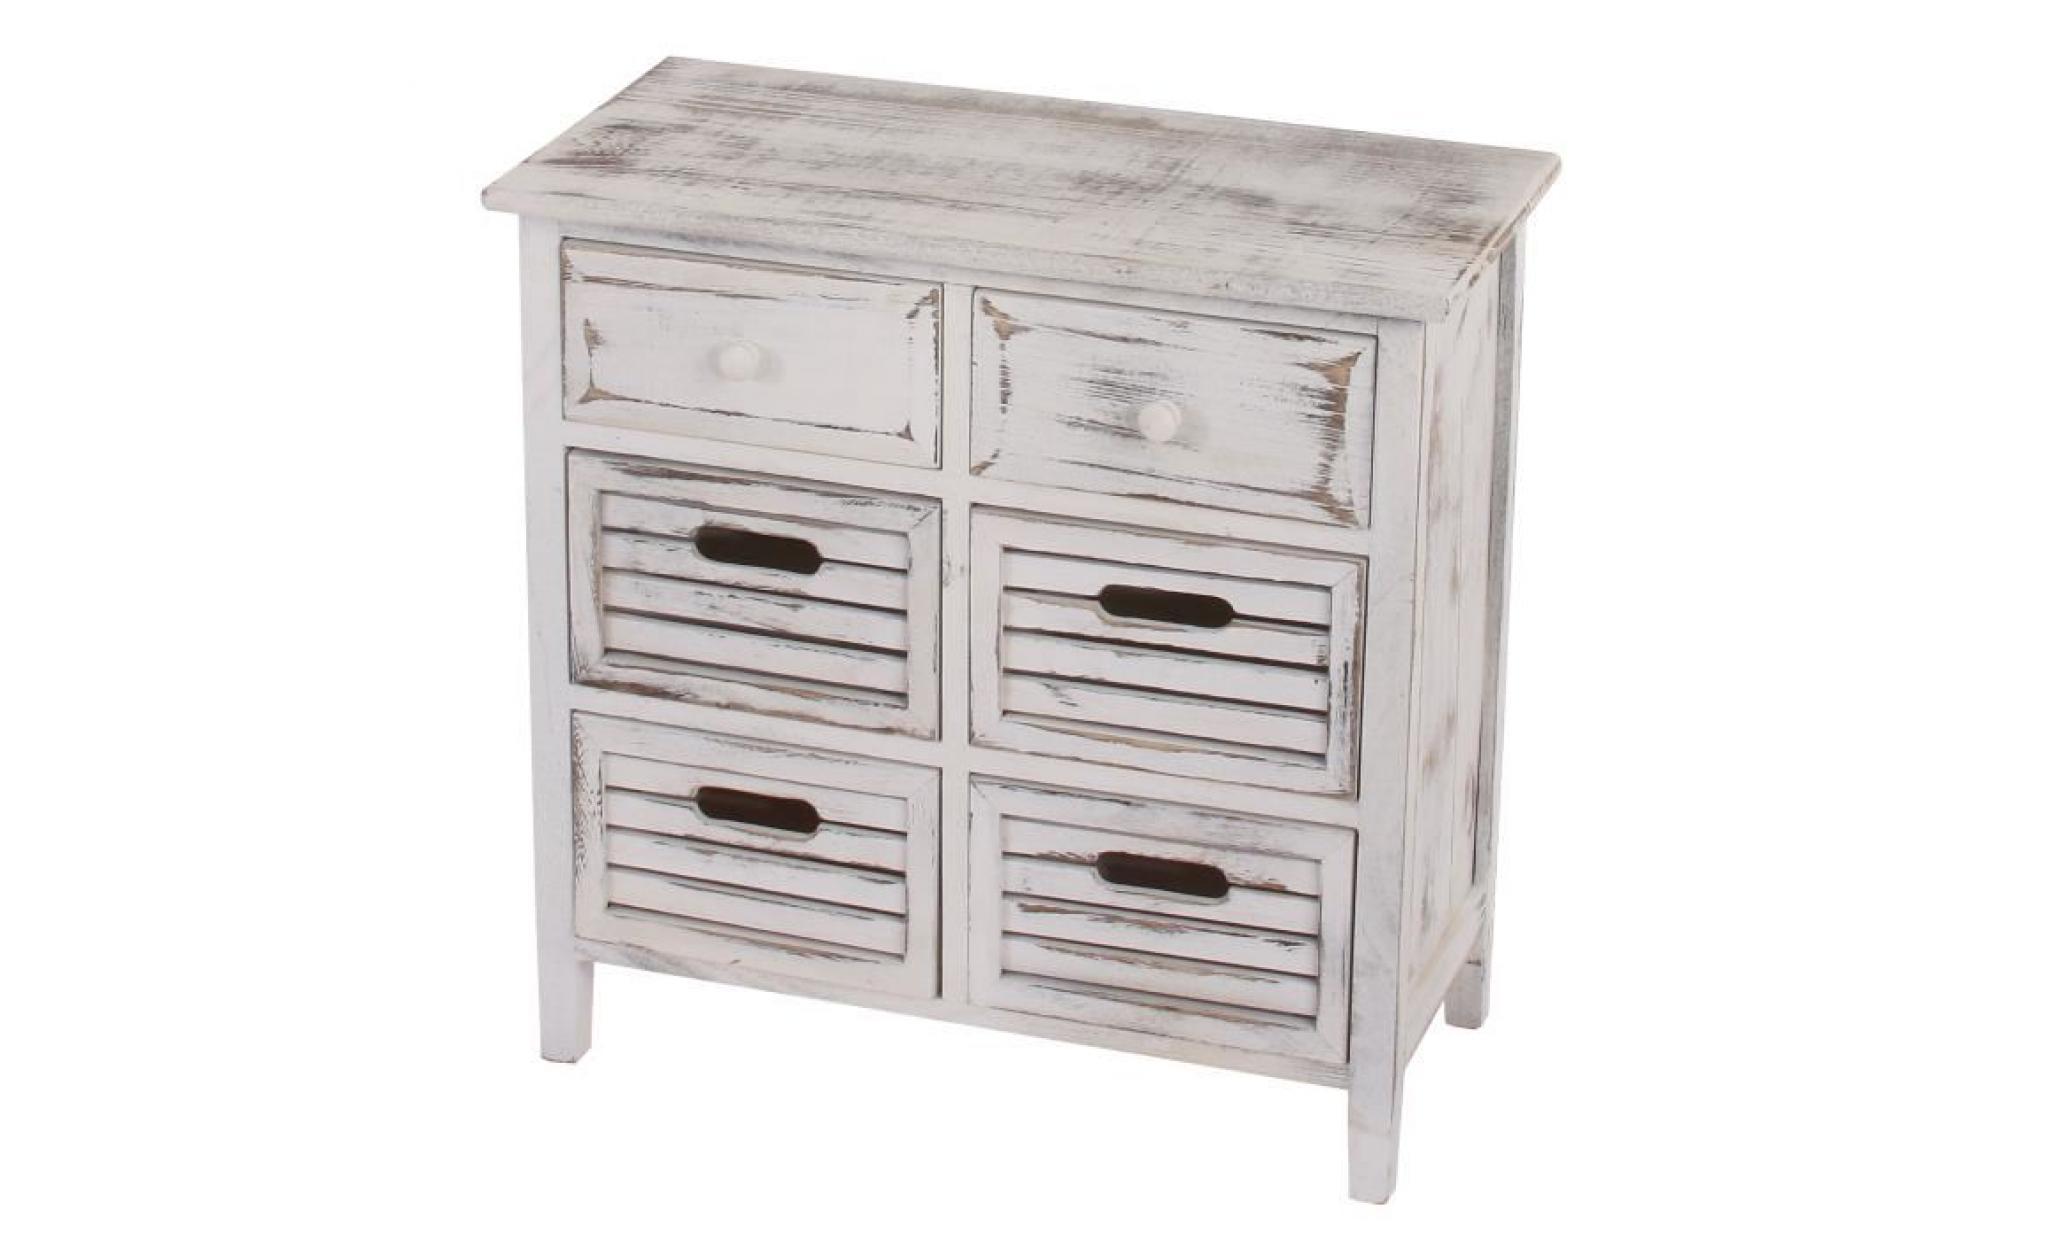 commode / table d'appoint / armoire,6 tiroirs,60x30x60cm, shabby, vintage, blanc.